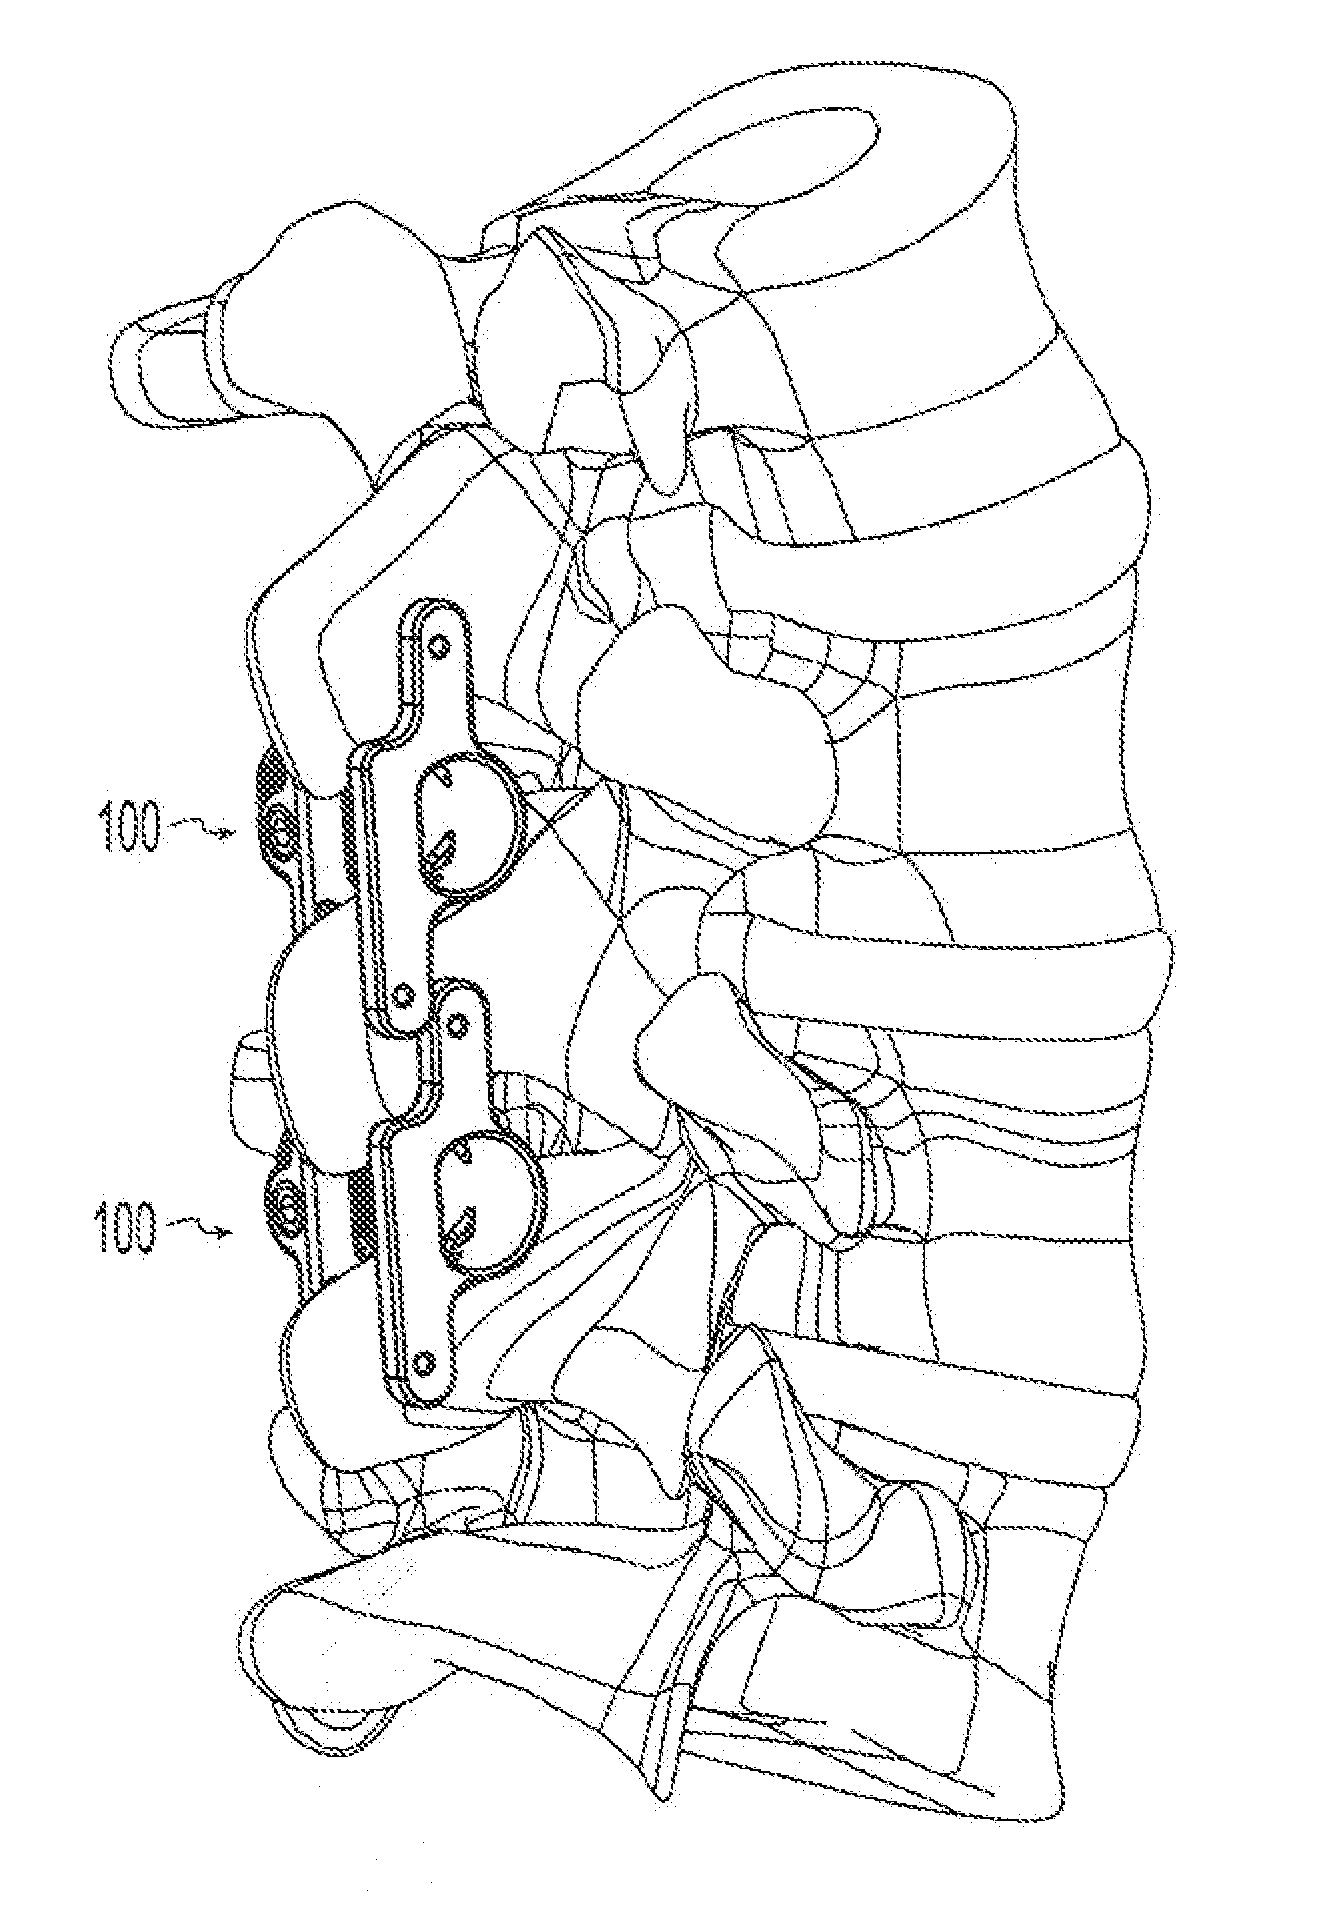 Methods for compression fracture treatment with spinous process fixation systems